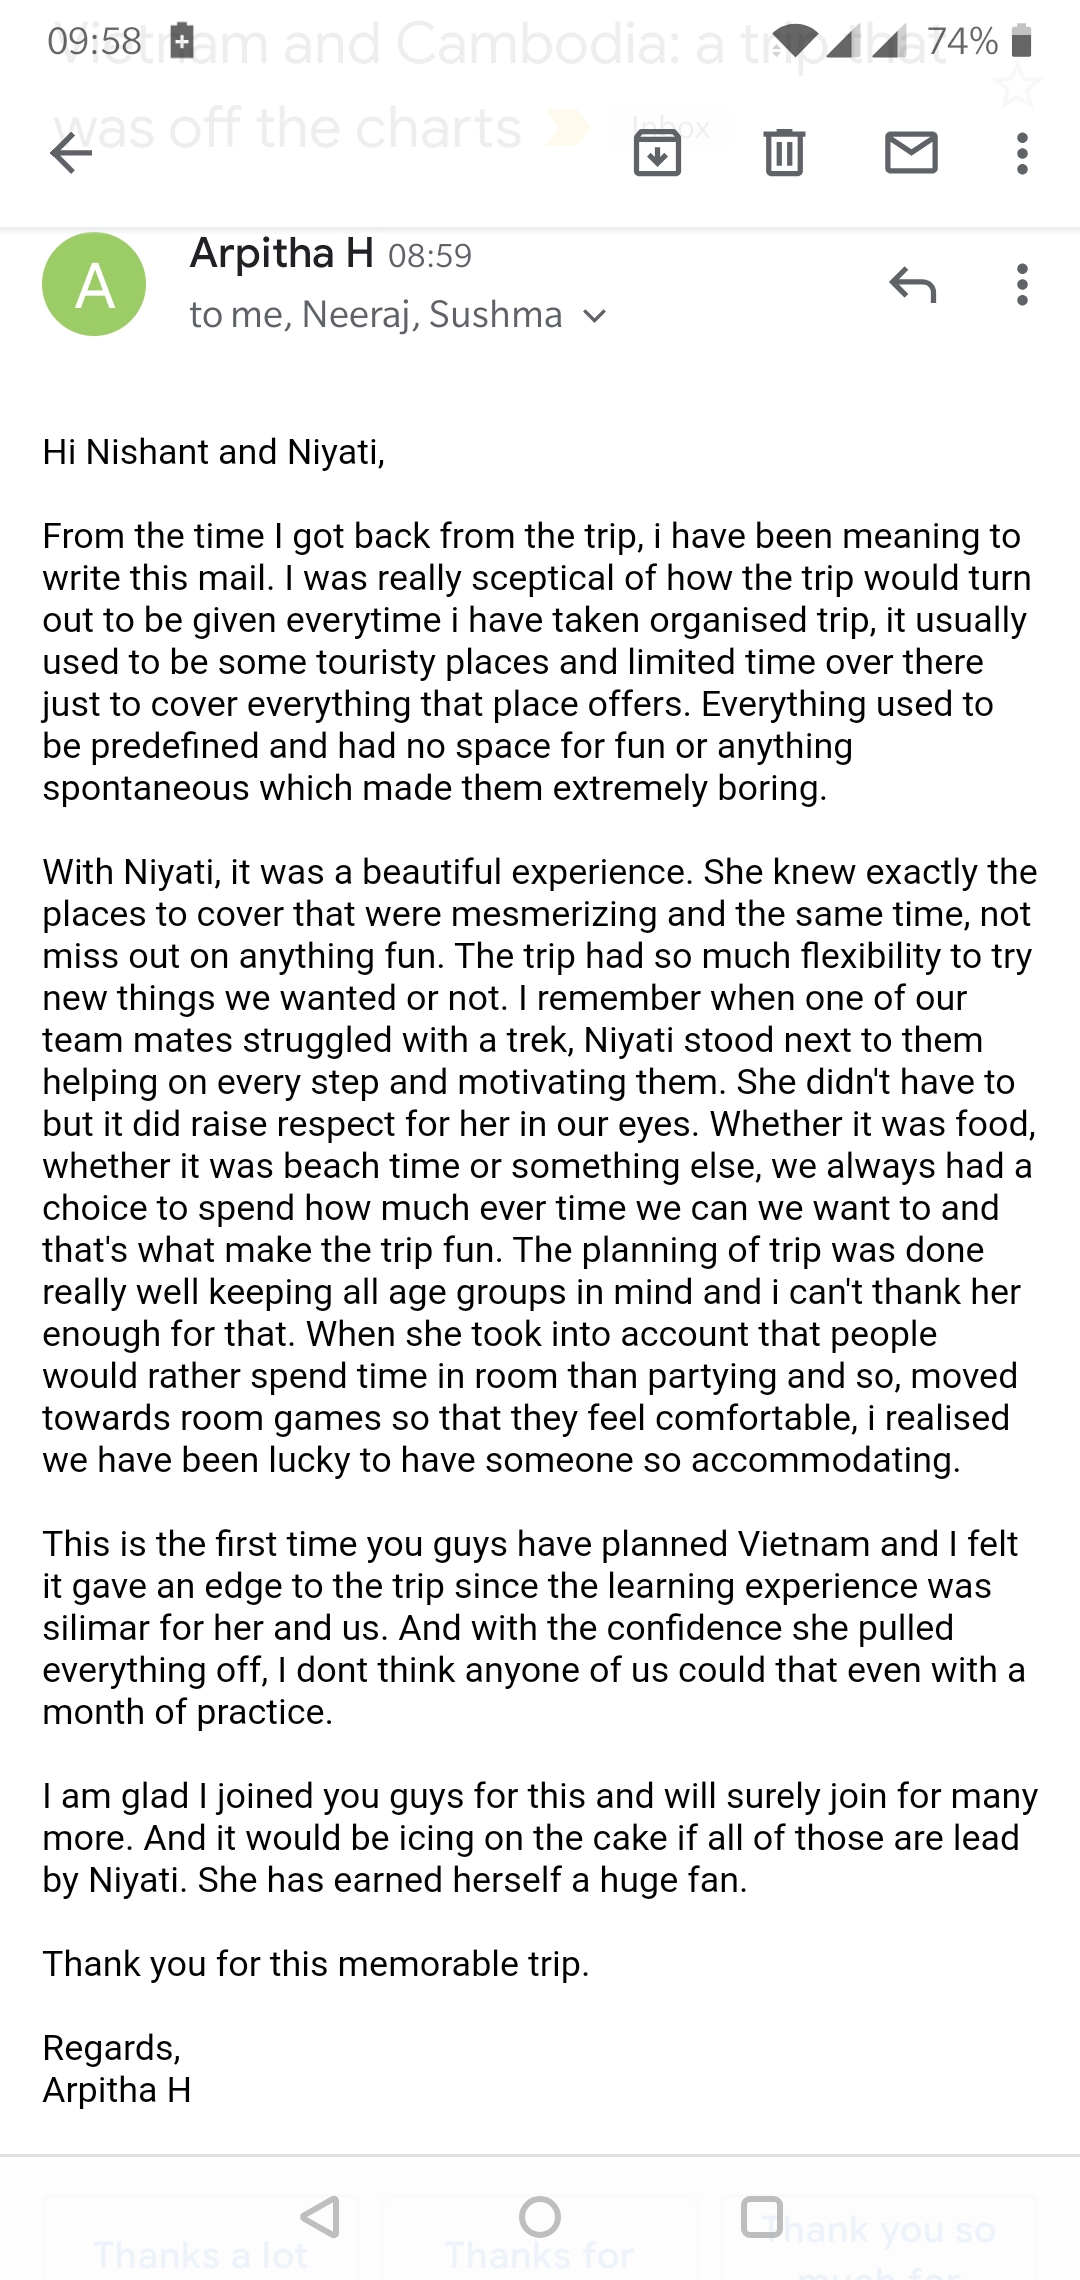 On his own trip review